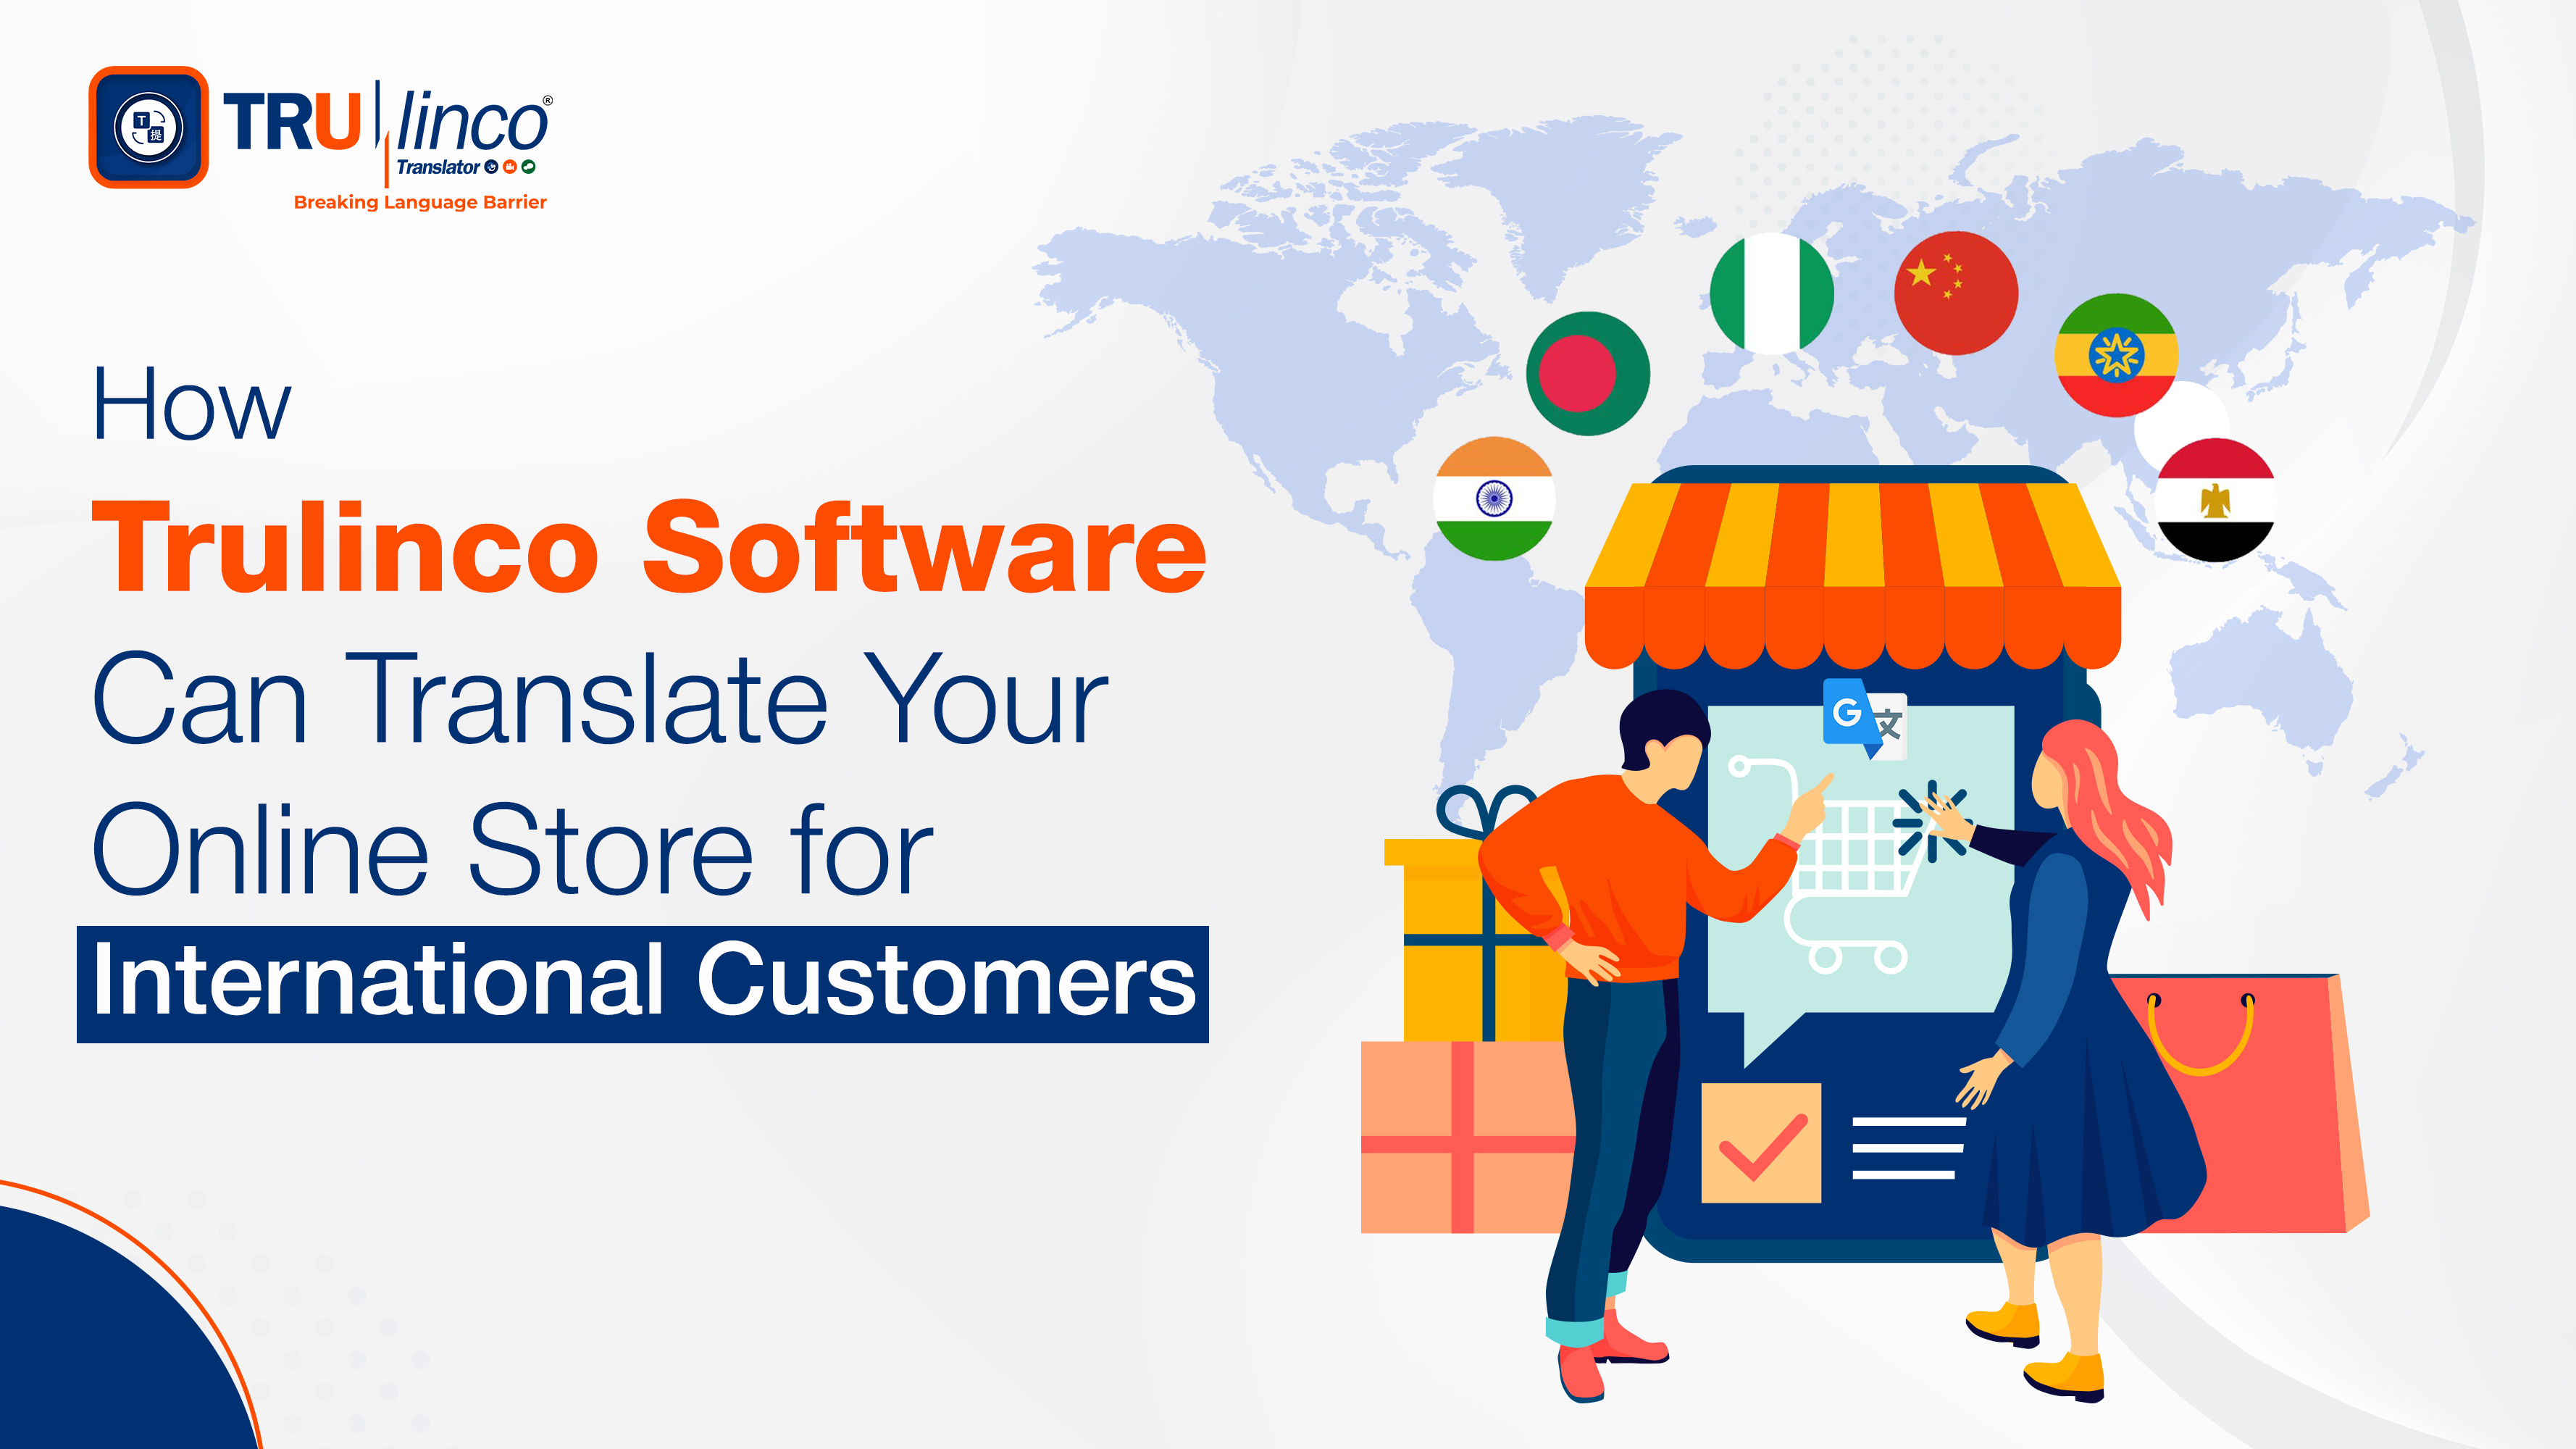 How Trulinco Software Can Translate Your Online Store for International Customers